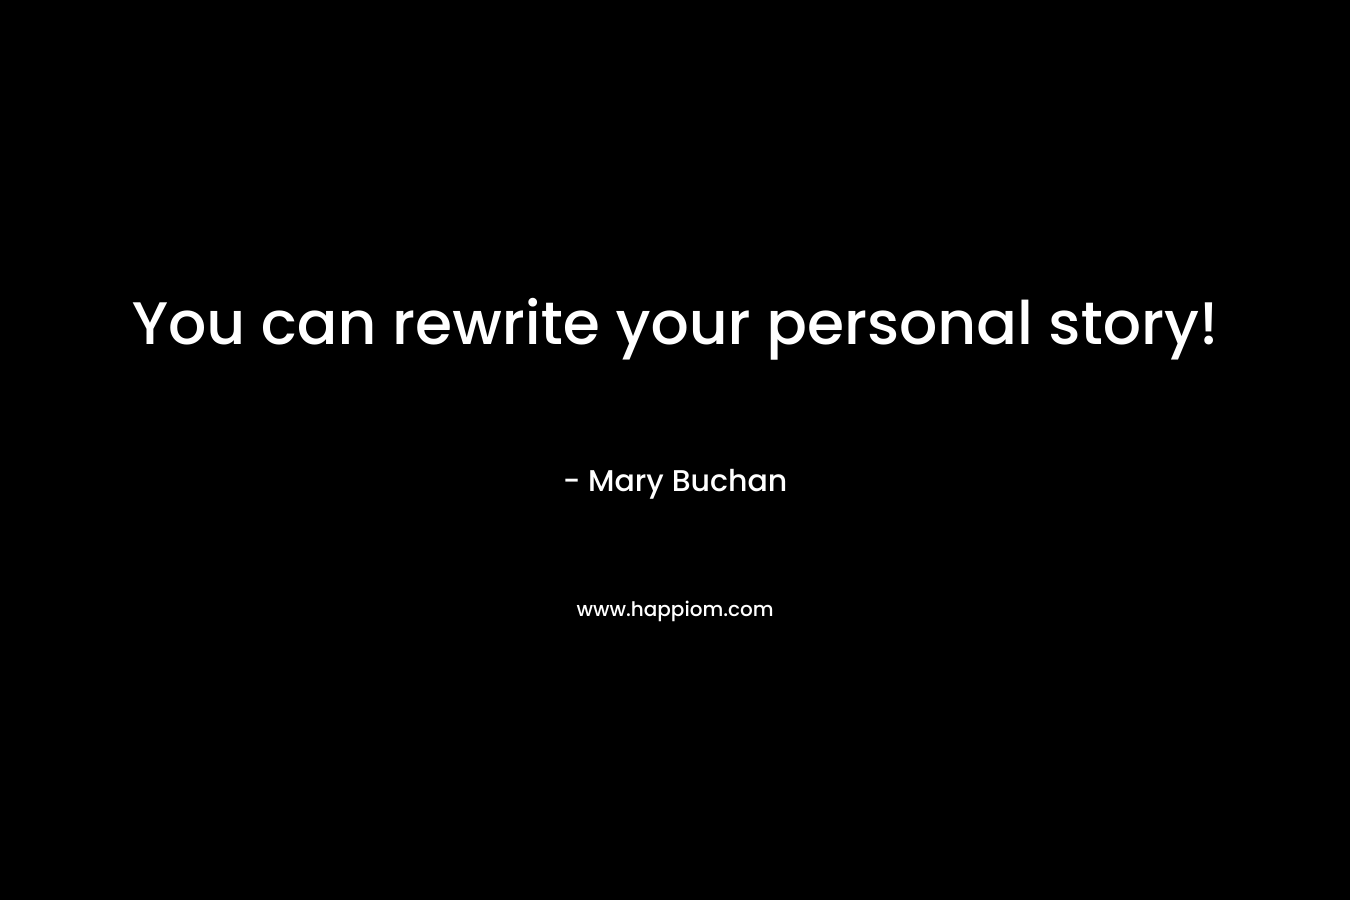 You can rewrite your personal story!